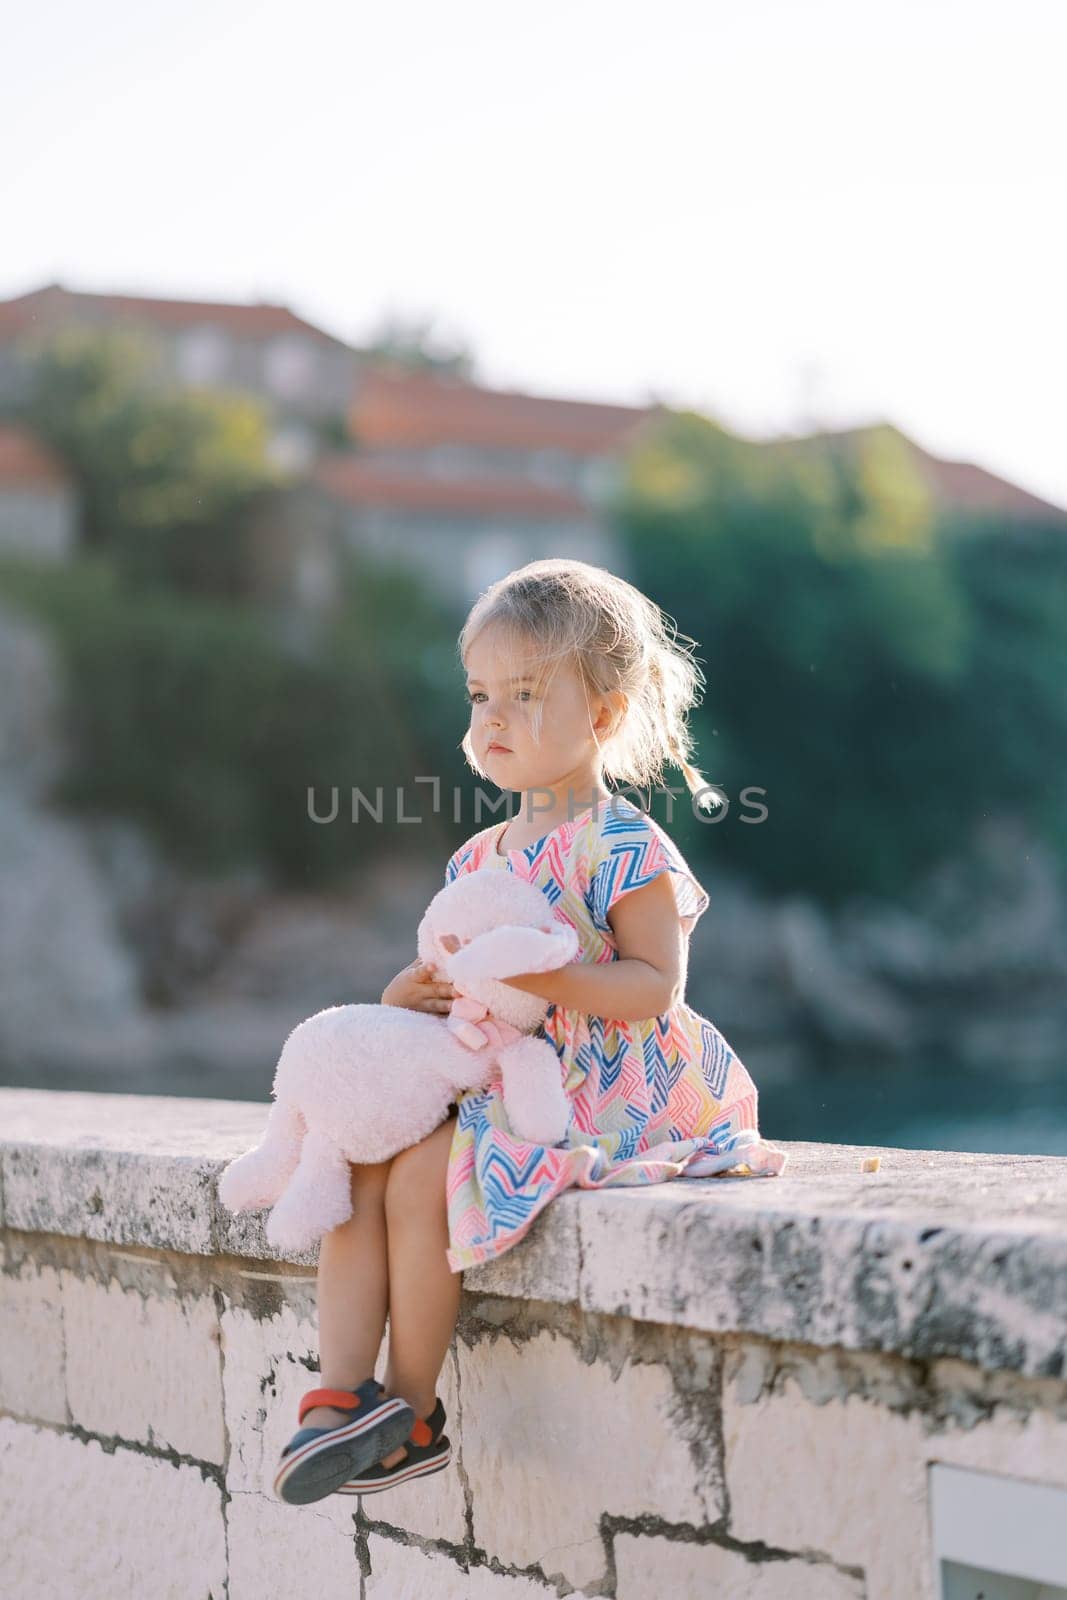 Little girl with a soft toy sits on a stone fence and looks ahead by Nadtochiy